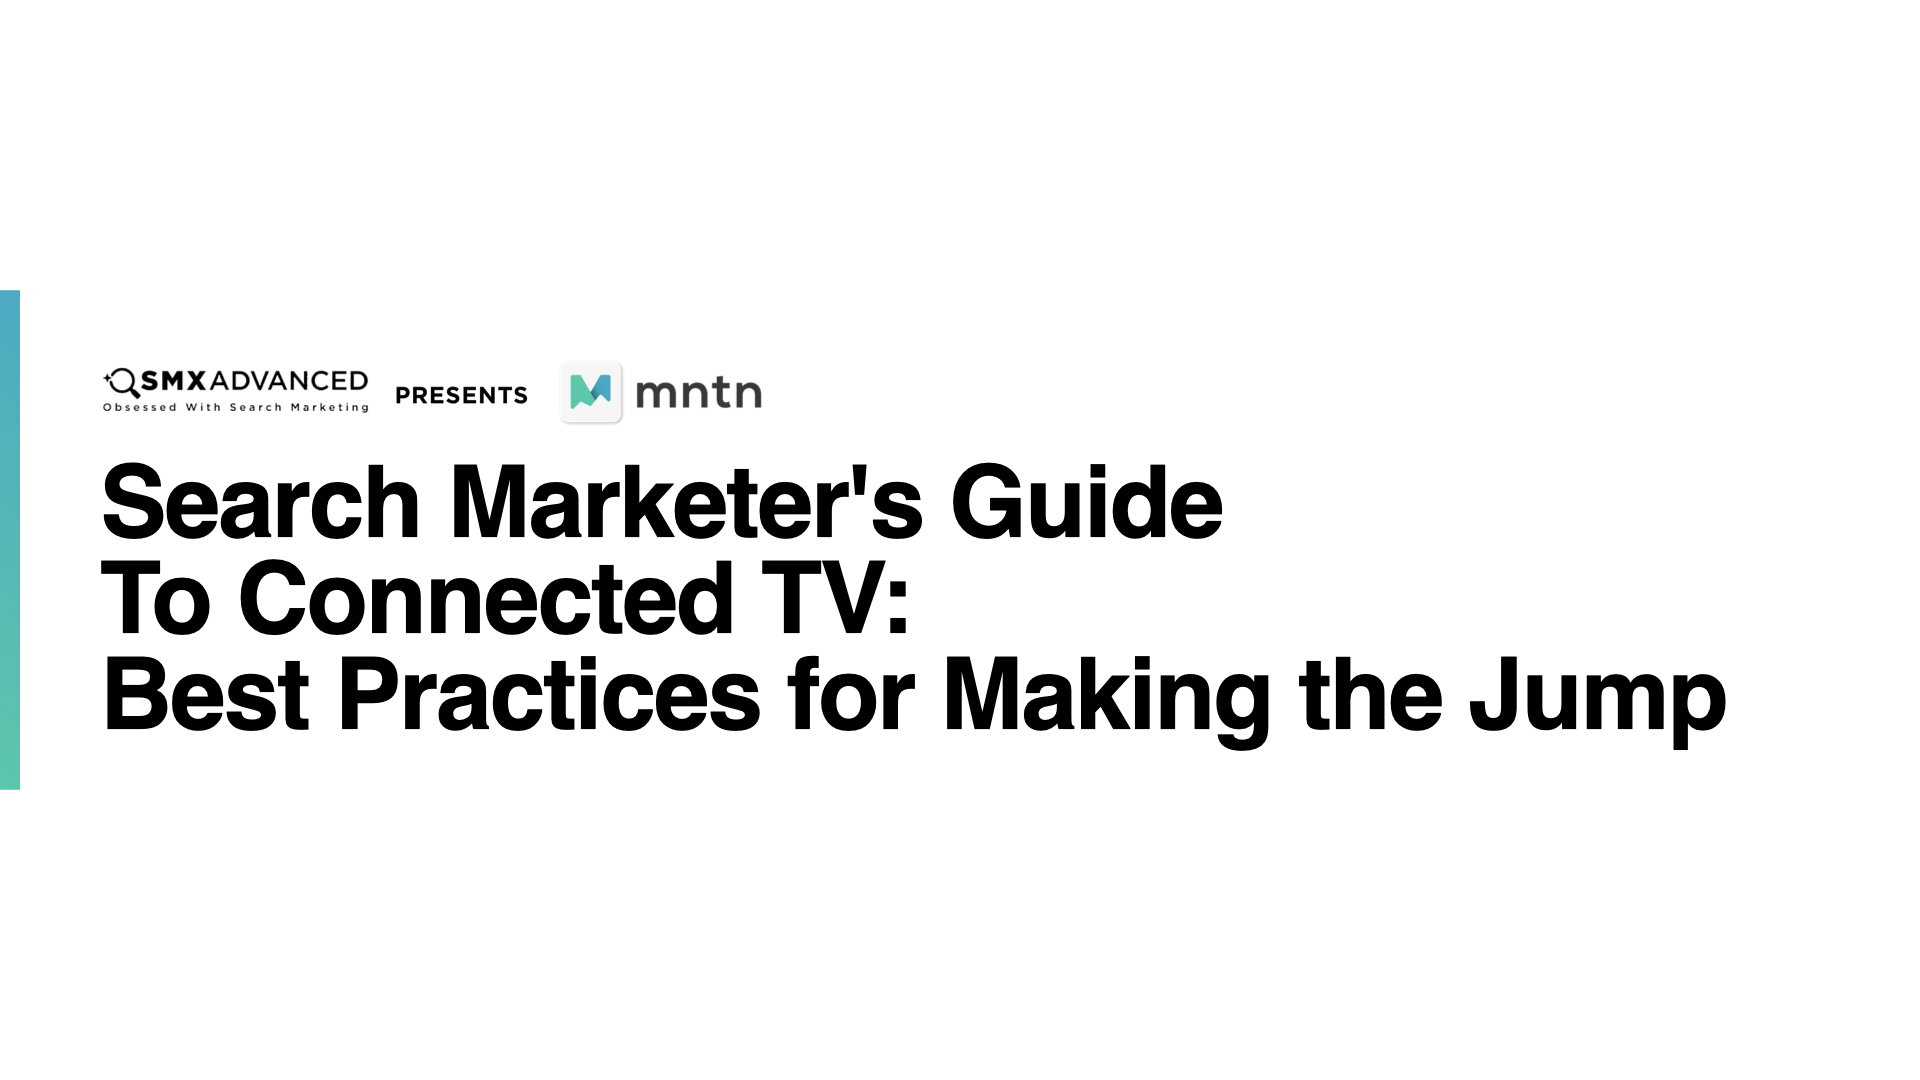 Search Marketer’s Guide to Connected TV: Best Practices for Making the Jump